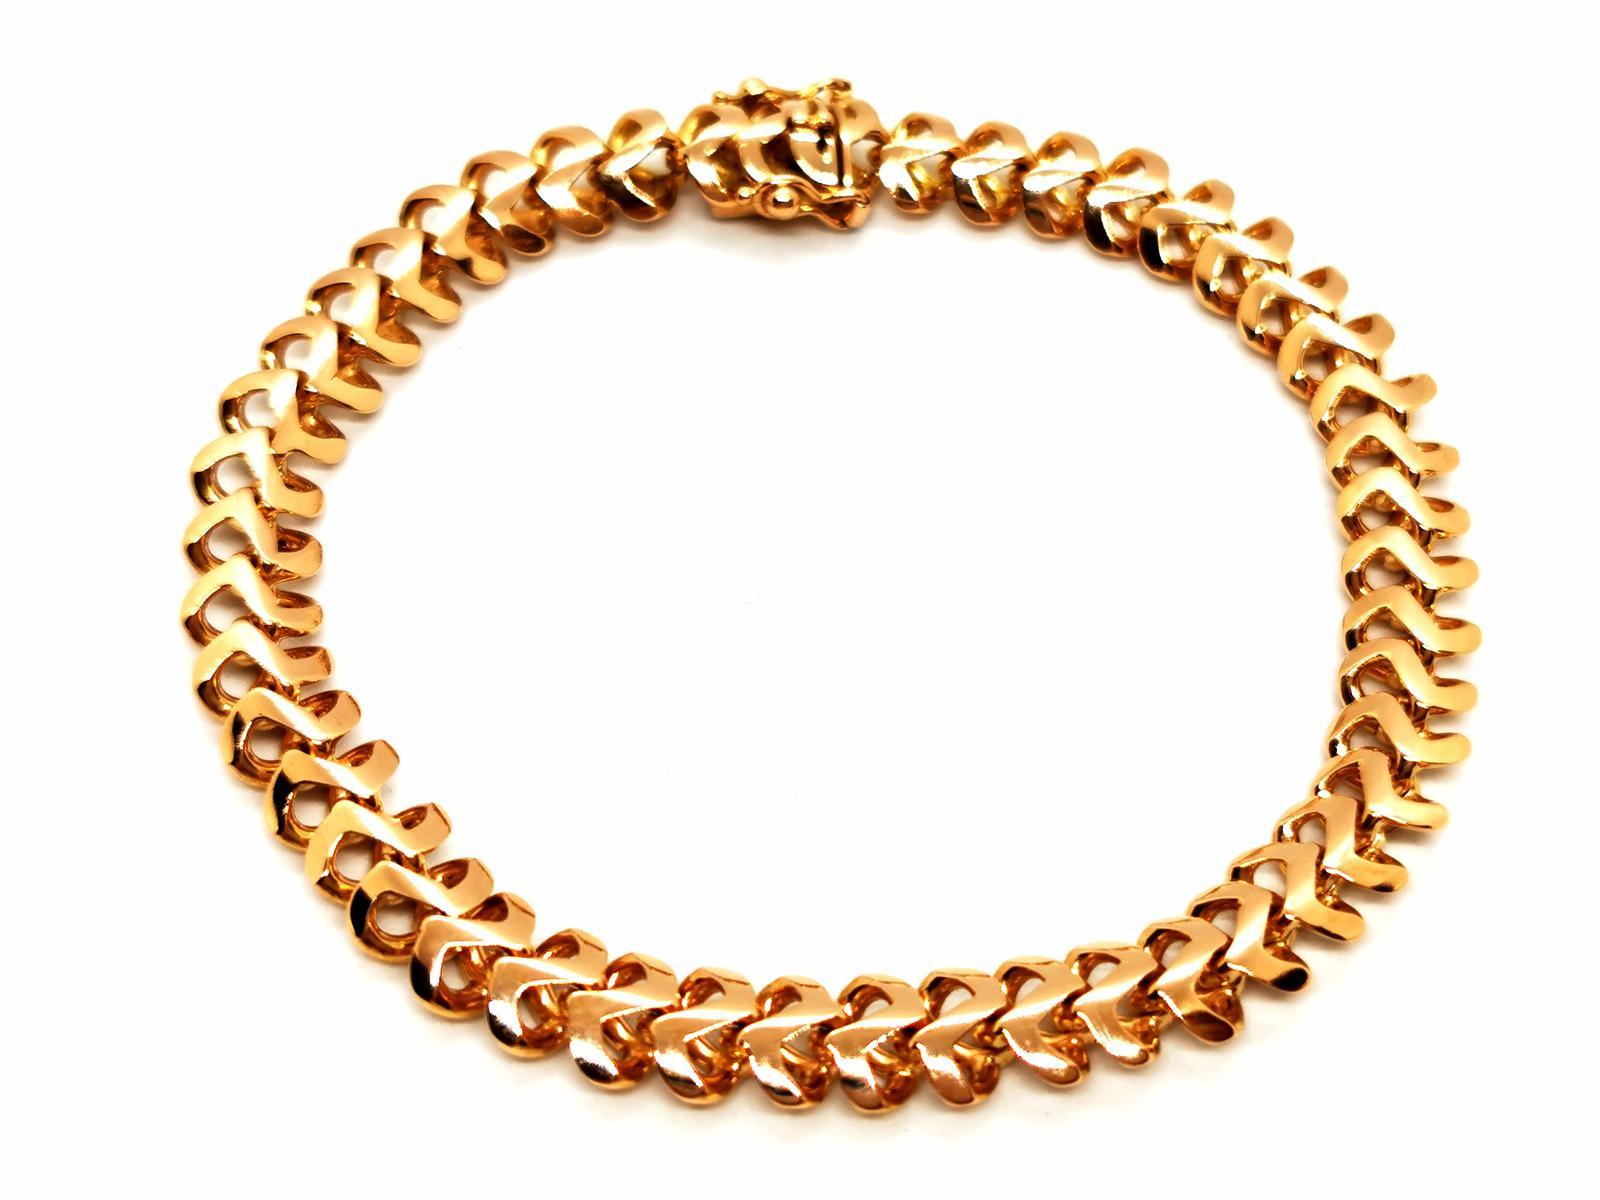 Bracelet in yellow gold 750 thousandths (18 carats). fancy mesh. ratchet clasp in eight safety. length: 19.5 cm. width: 0.73. total weight: 23.78 g. eagle head hallmark. excellent condition.
